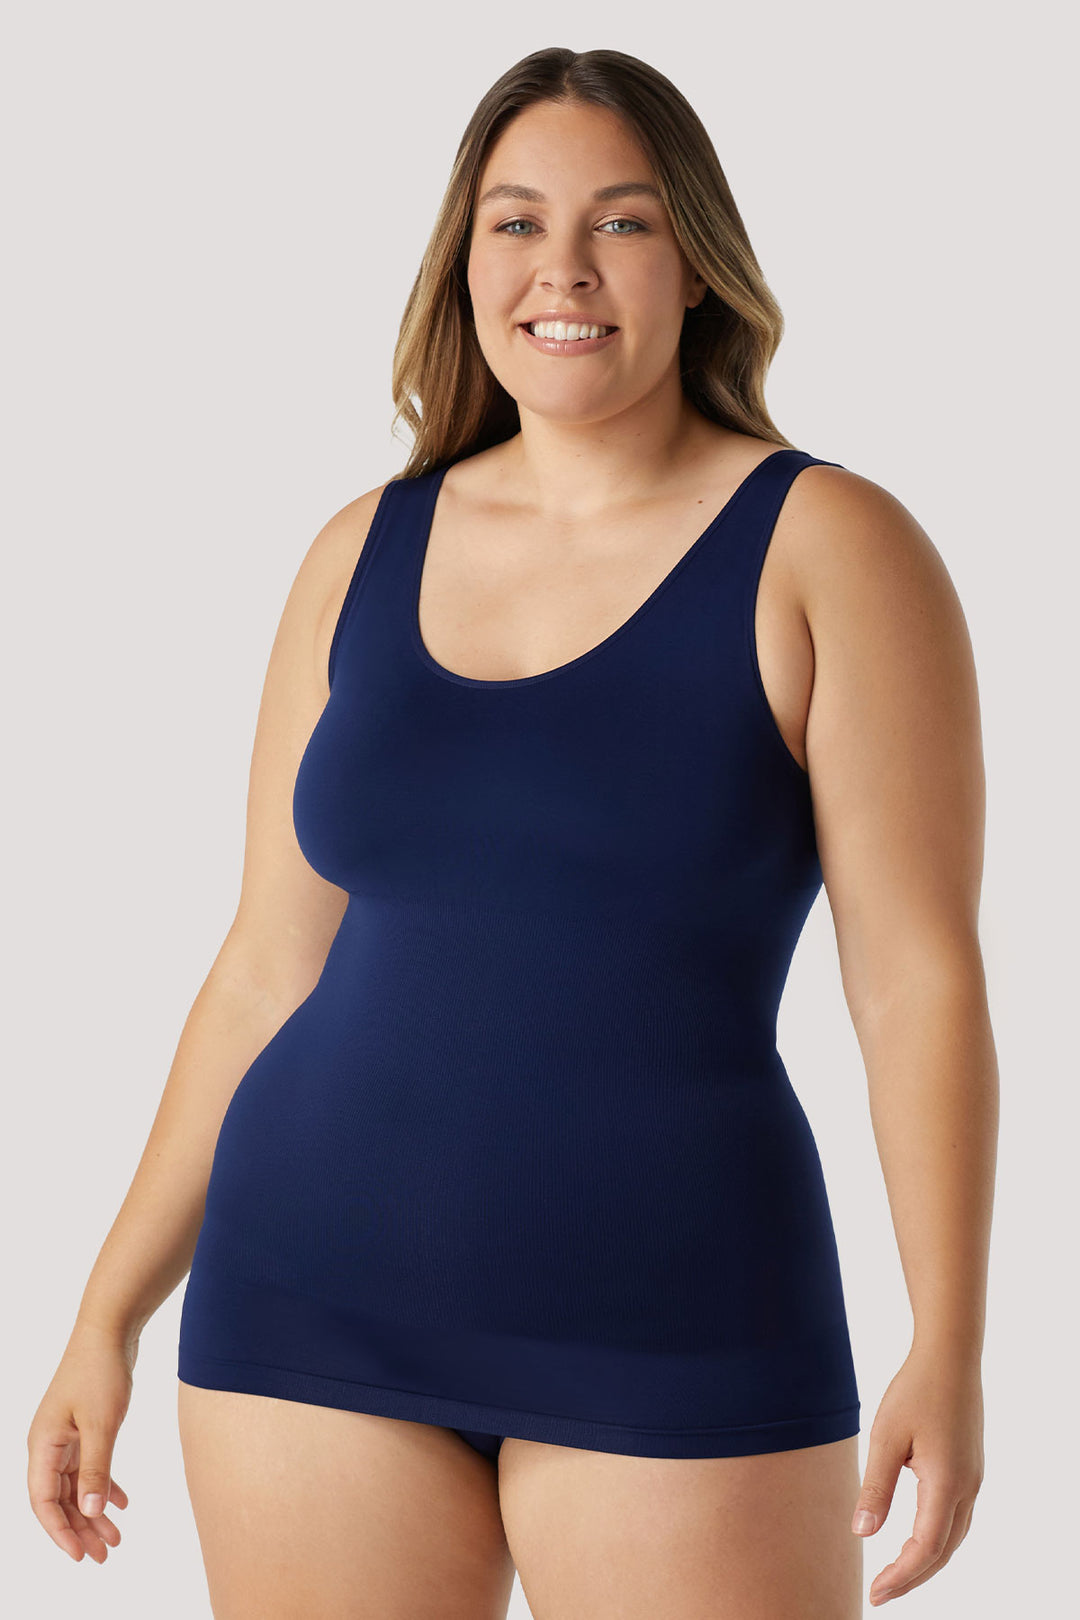 Women's comfortable Reversible Neckline, shaping and firming cami | Camyz Shapewear Smoothing Tank I Bella Bodies Australia I Navy | Front